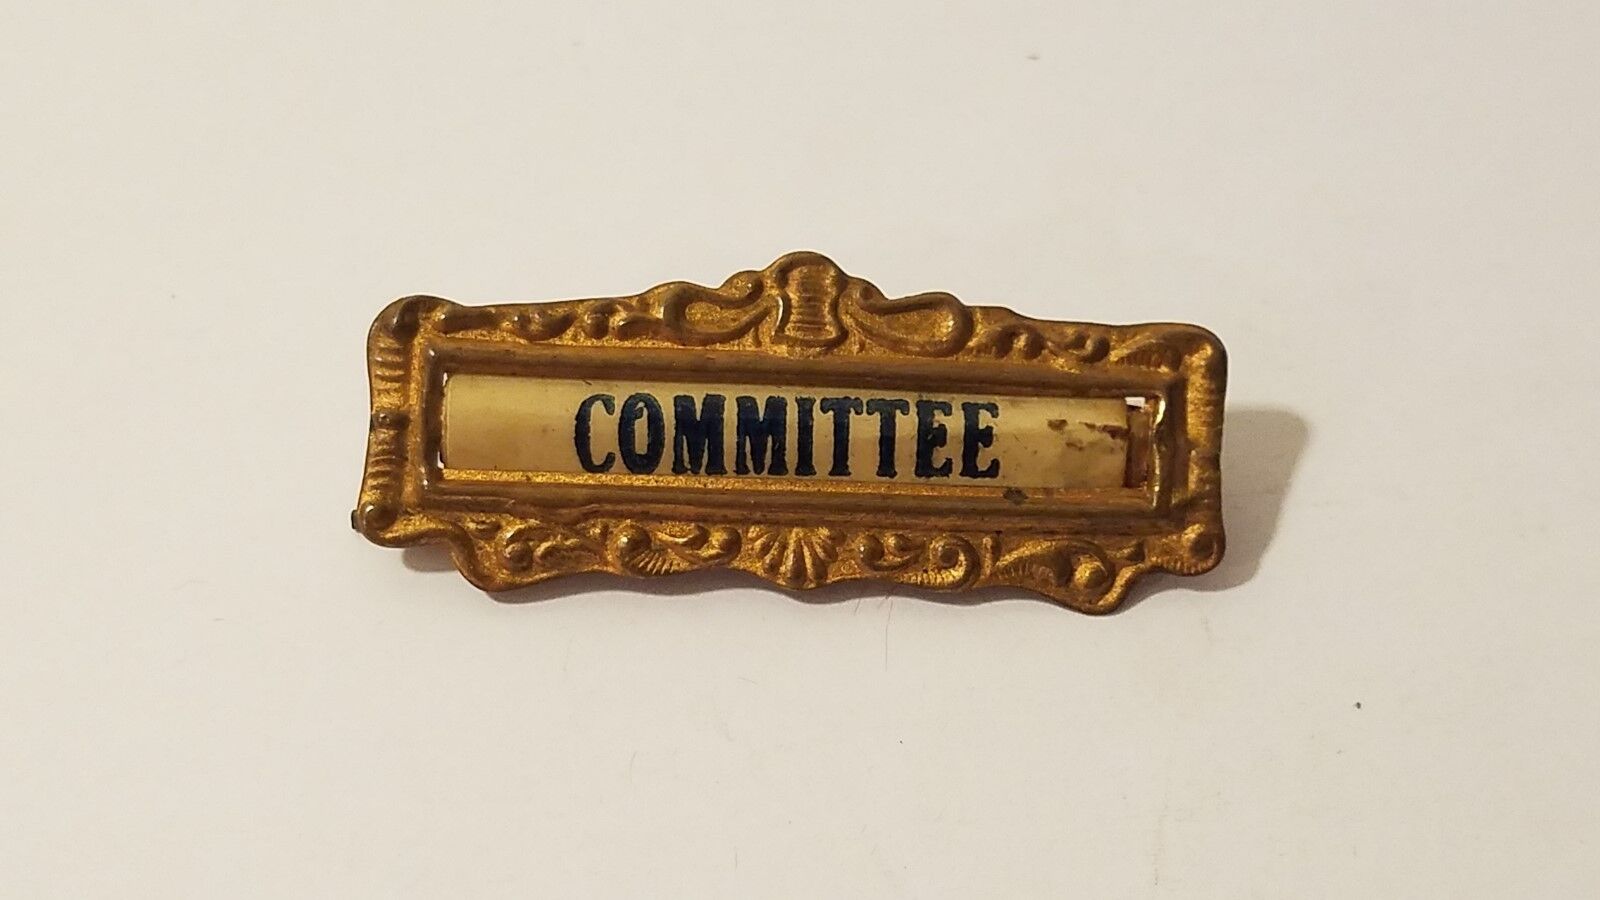 Old Vintage Antique Ornate Committee Pin Holder ID Name Tag Art Deco